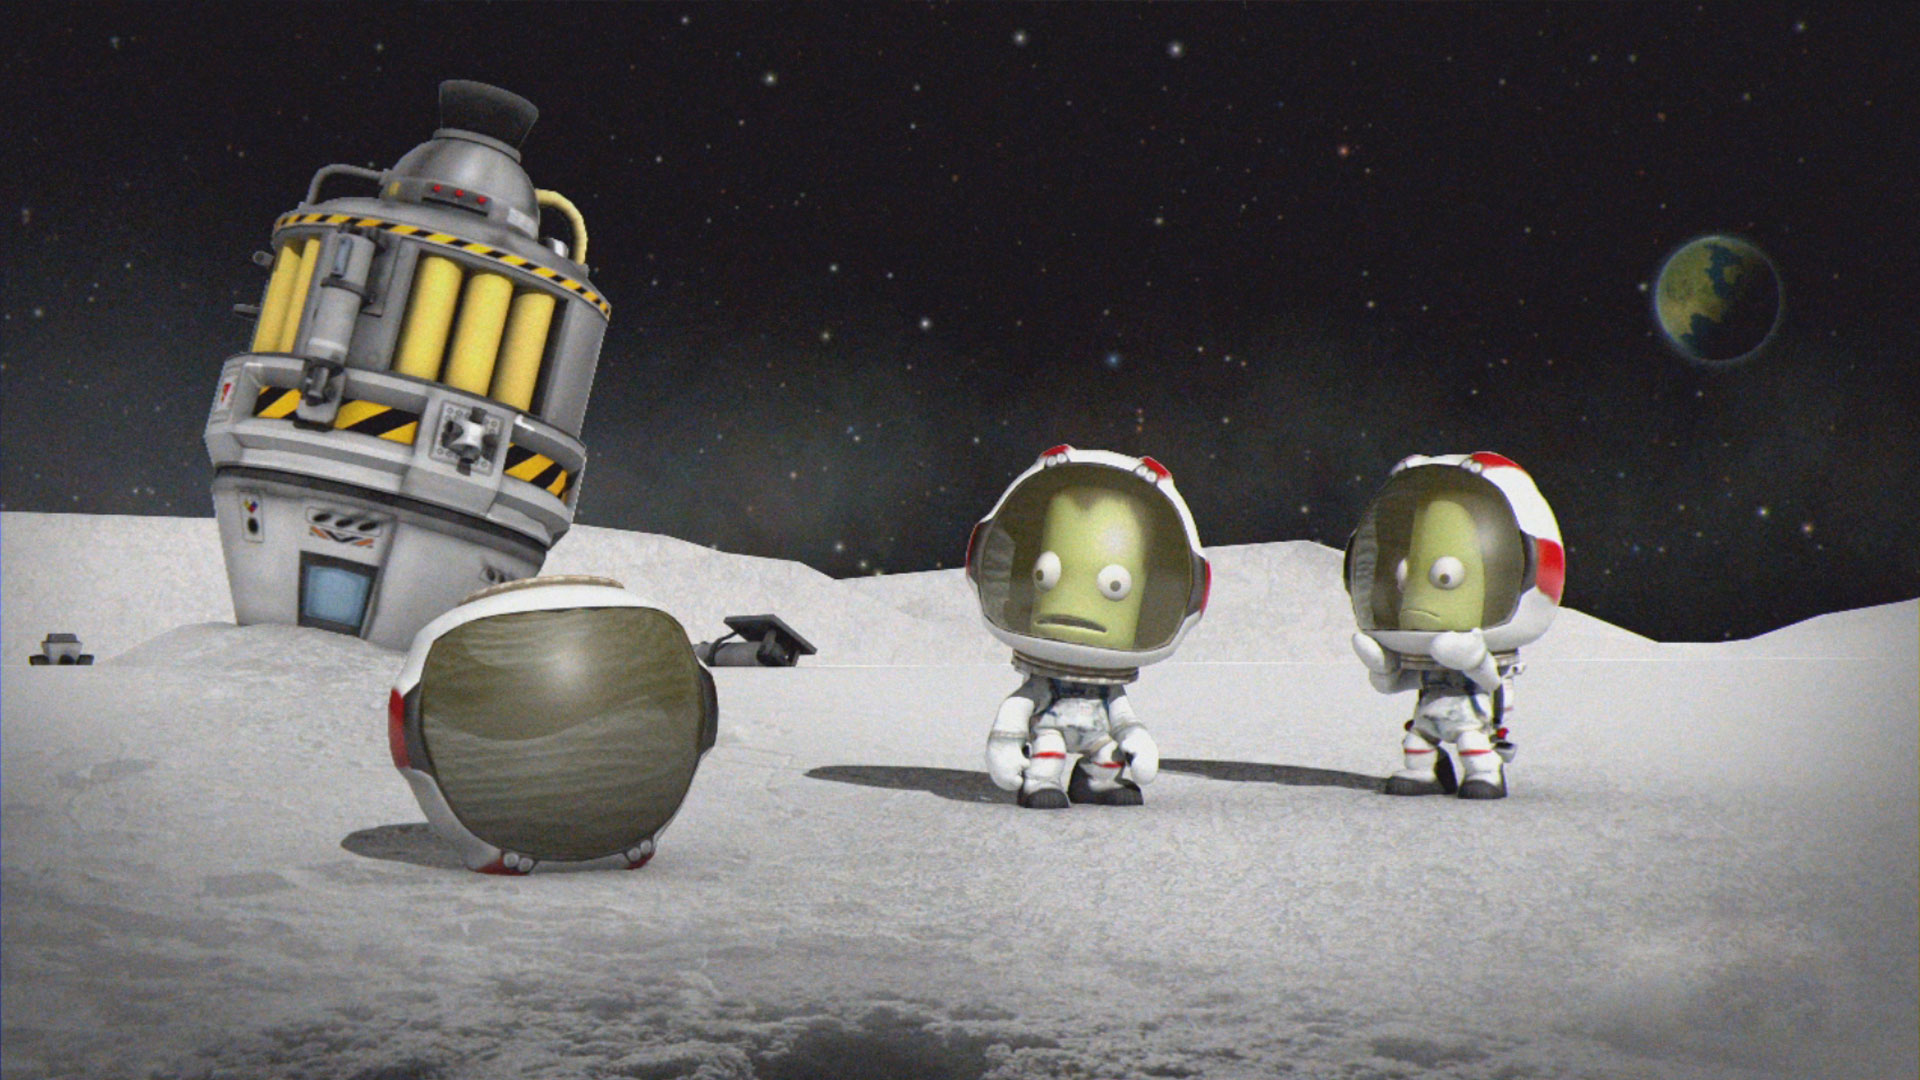 Conduct your own Apollo mission in KSP by launching a rocket to the moons Mun or Minmus. Credit: Squad, Monkey Squad S.A de C.V.